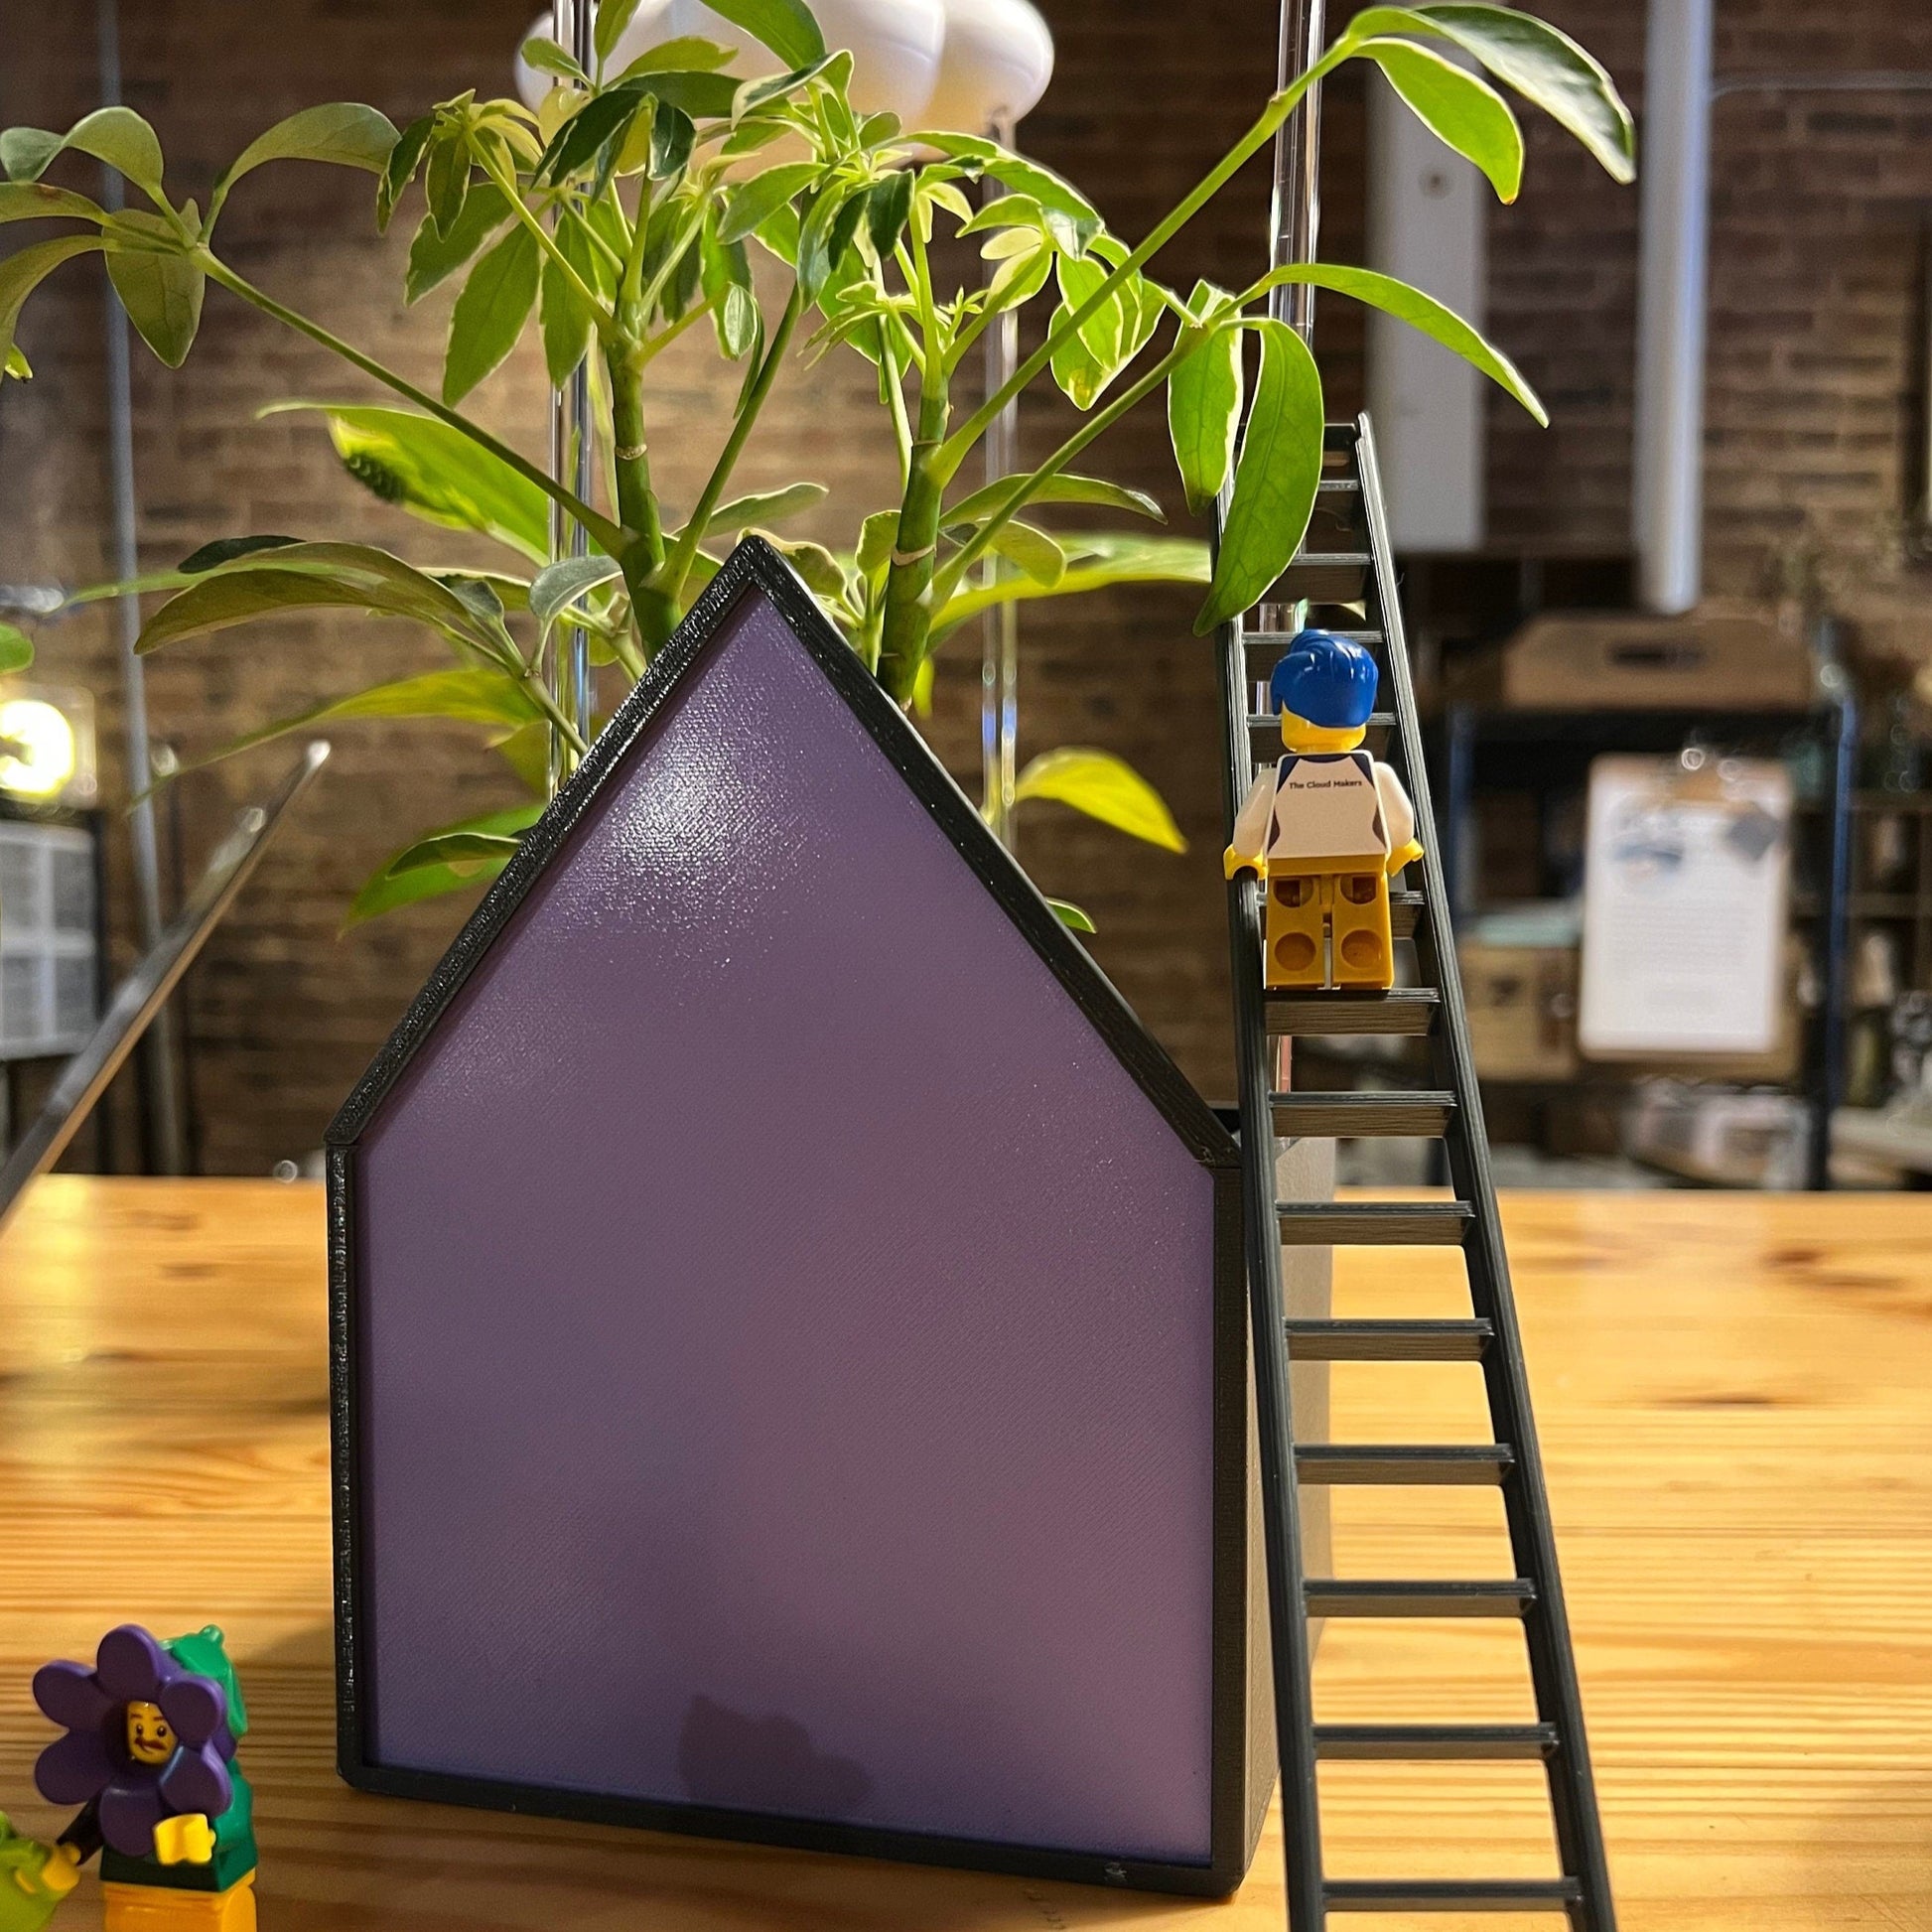 Ladder Charm for dripping rain cloud and purple house planter